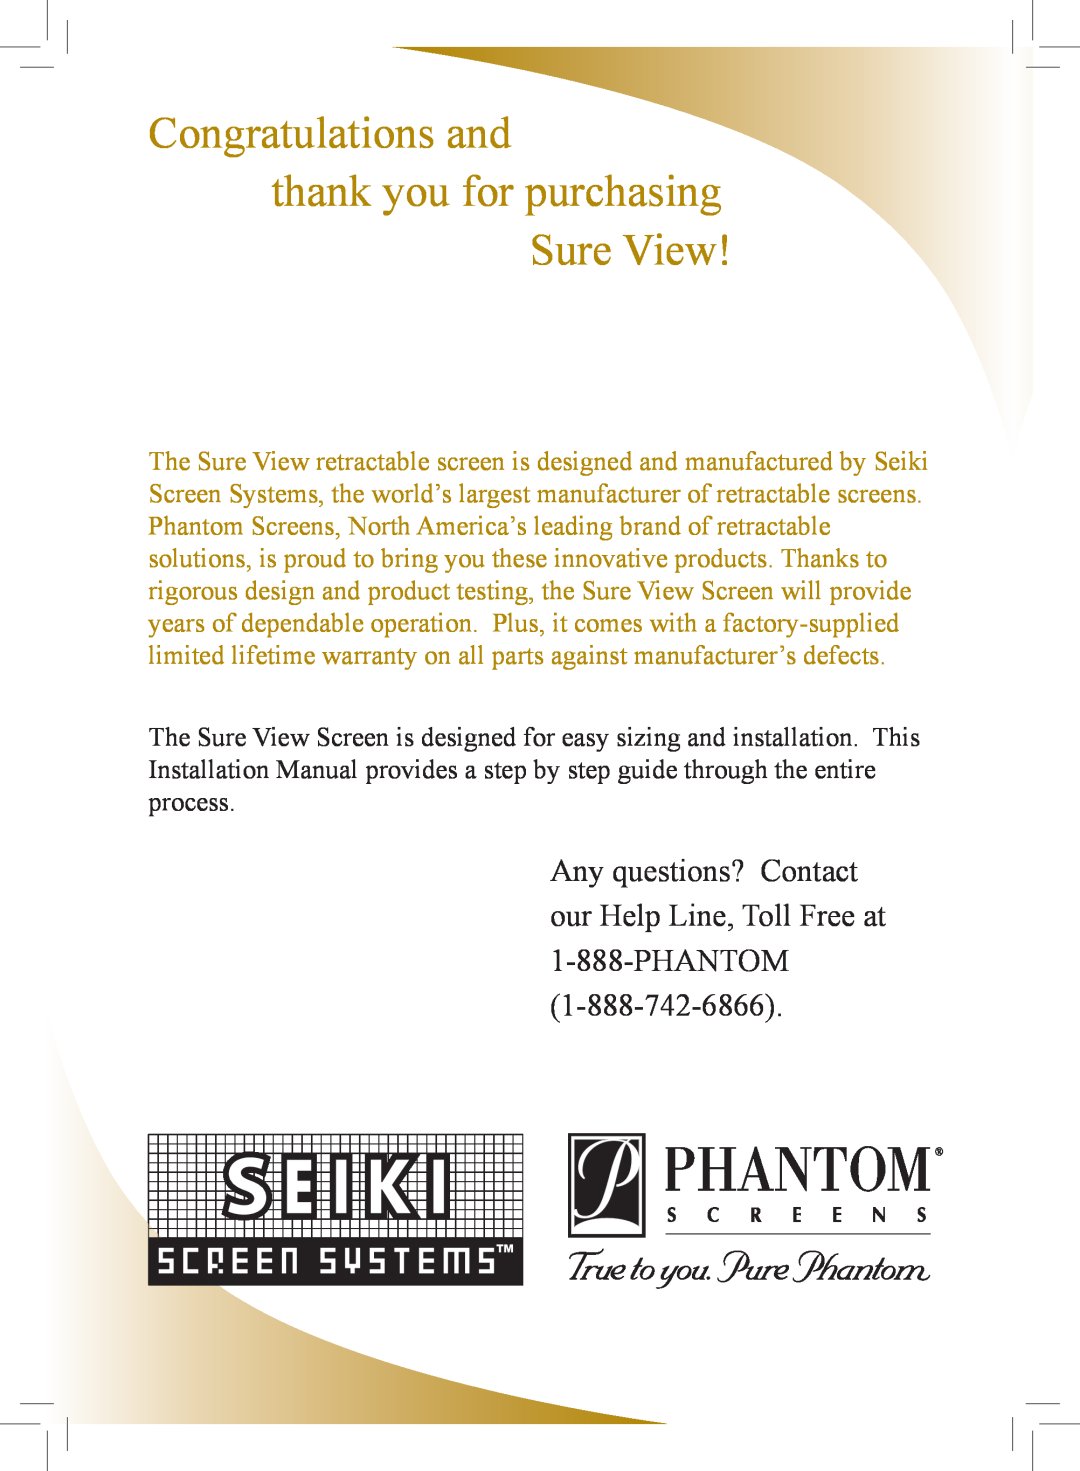 Phantom Tech SU0508L installation manual Congratulations and thank you for purchasing, Sure View 